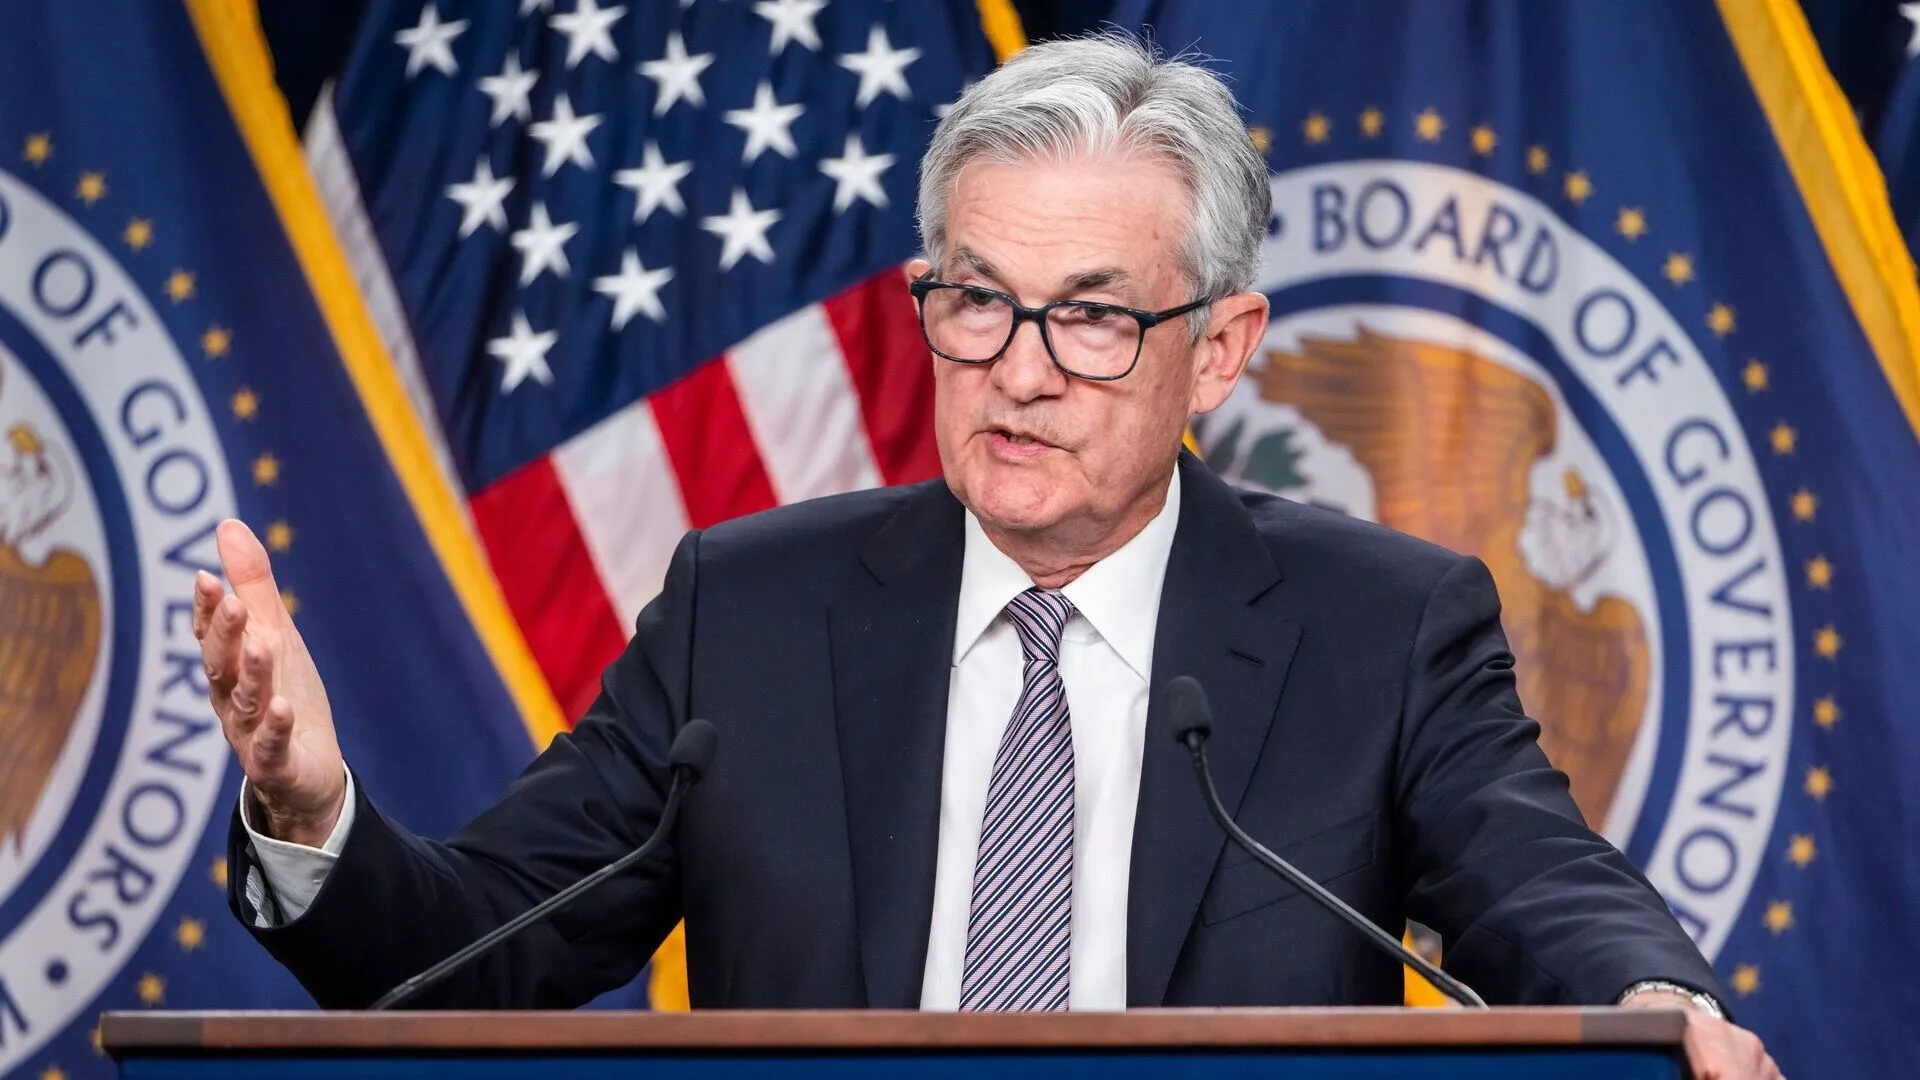 Mandatory Credit: Photo by JIM LO SCALZO/EPA-EFE/Shutterstock (13898324q)Federal Reserve Board Chairman Jerome Powell holds a news conference after the Fed decided to raise interest rates by a quarter of a percentage point at the William McChesney Martin Jr.